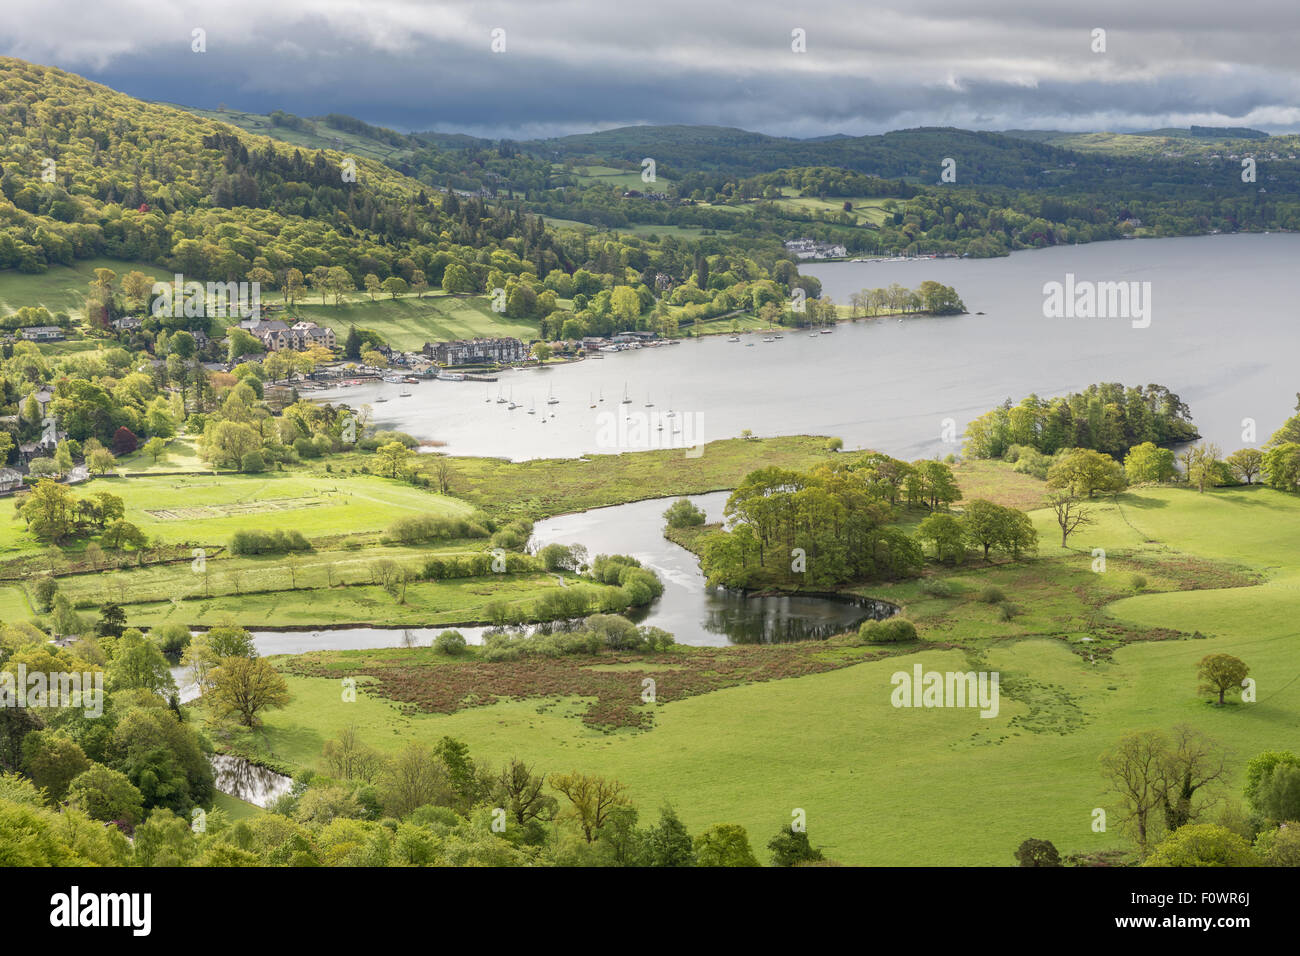 UK Lake District, tranquility and beauty Stock Photo